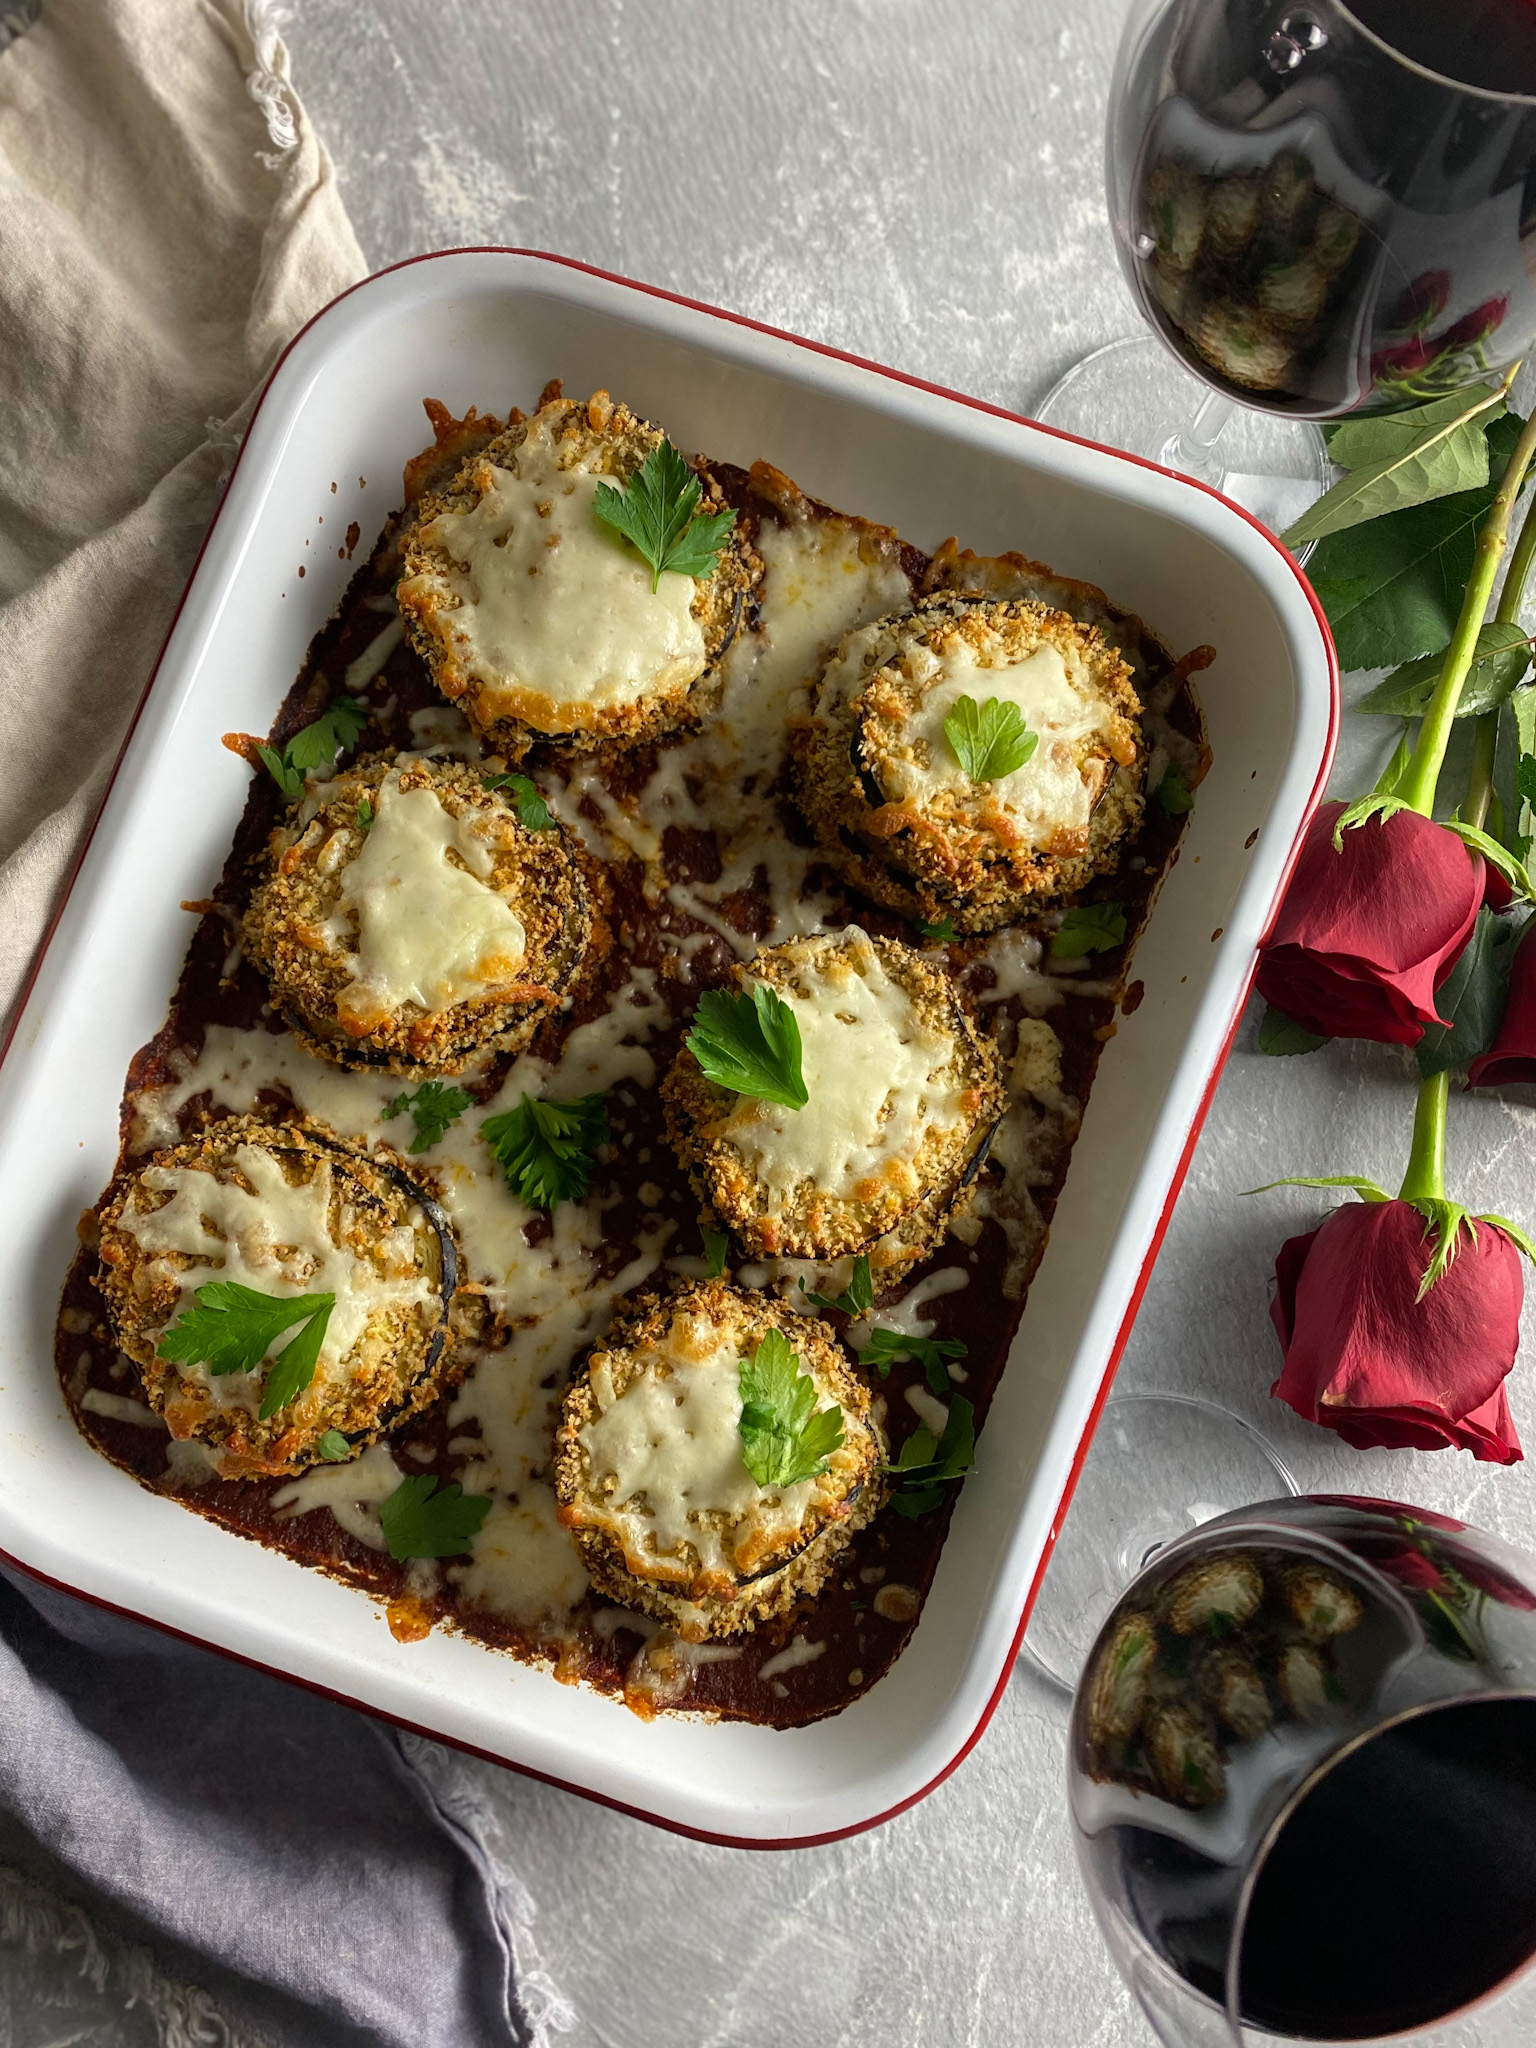 Crispy Baked Eggplant Parmesan in a pan with roses and red wine